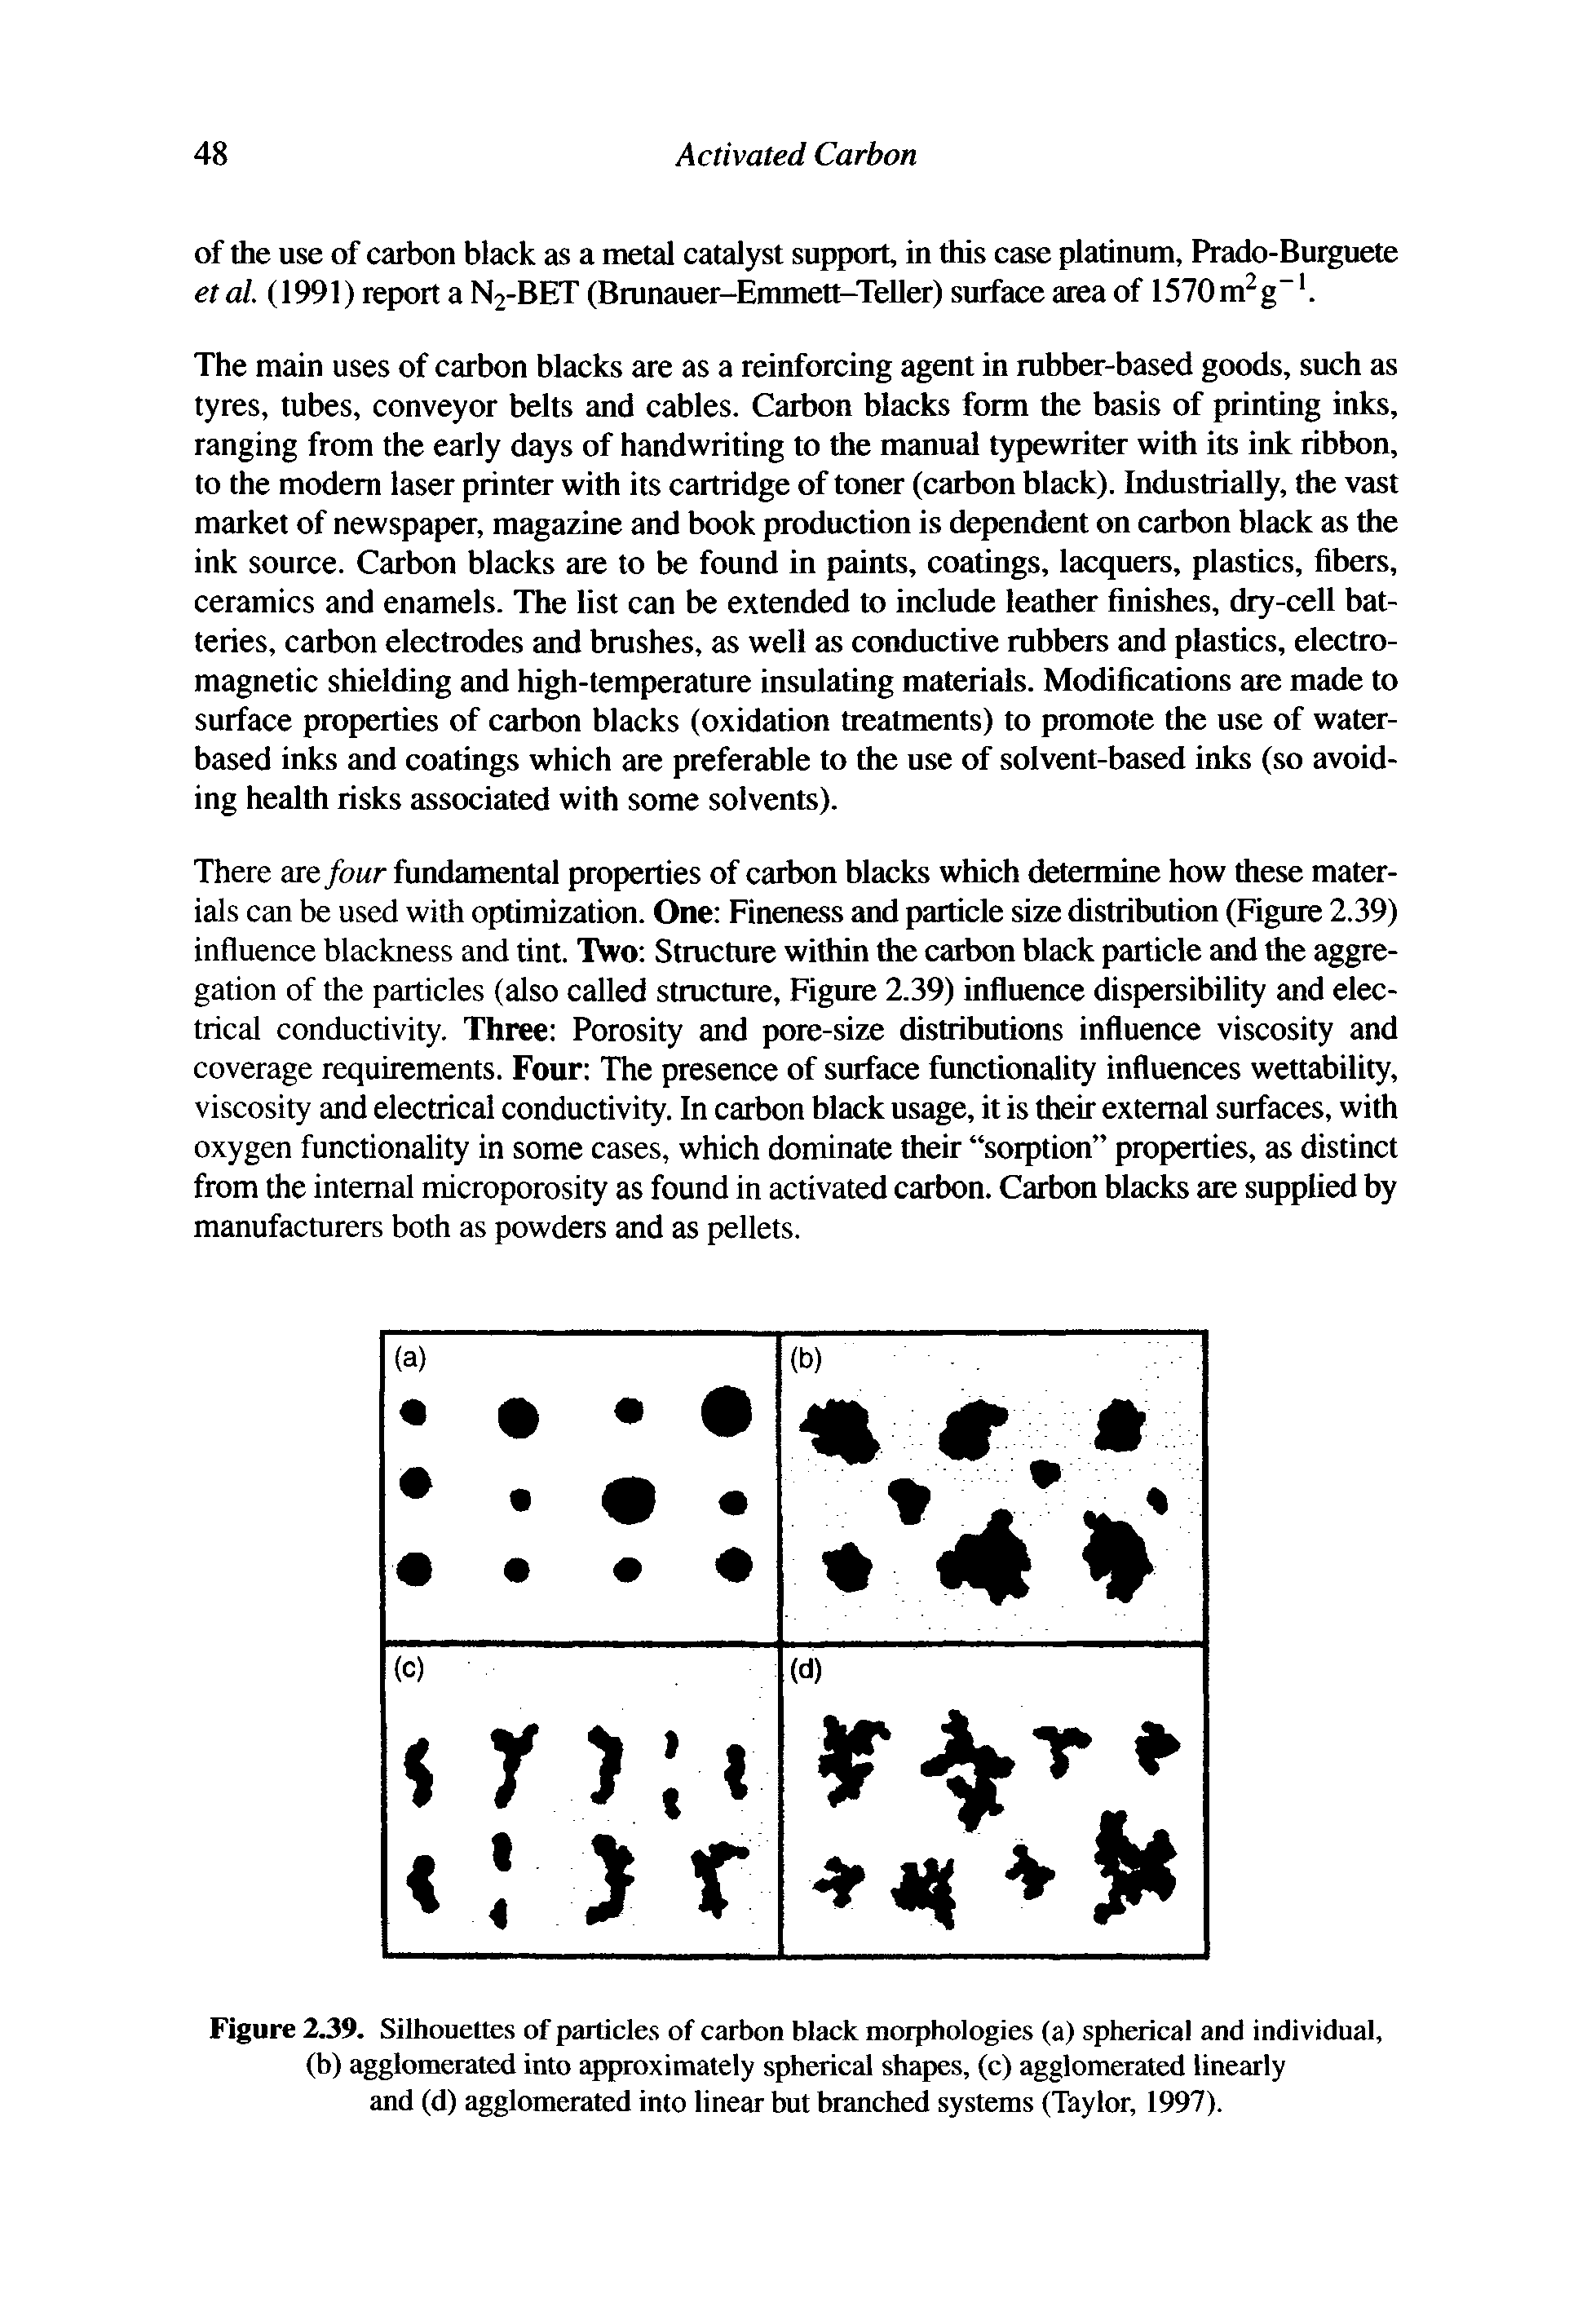 Figure 239. Silhouettes of particles of carbon black morphologies (a) spherical and individual, (b) agglomerated into approximately spherical shapes, (c) agglomerated linearly and (d) agglomerated into linear but branched systems (Taylor, 1997).